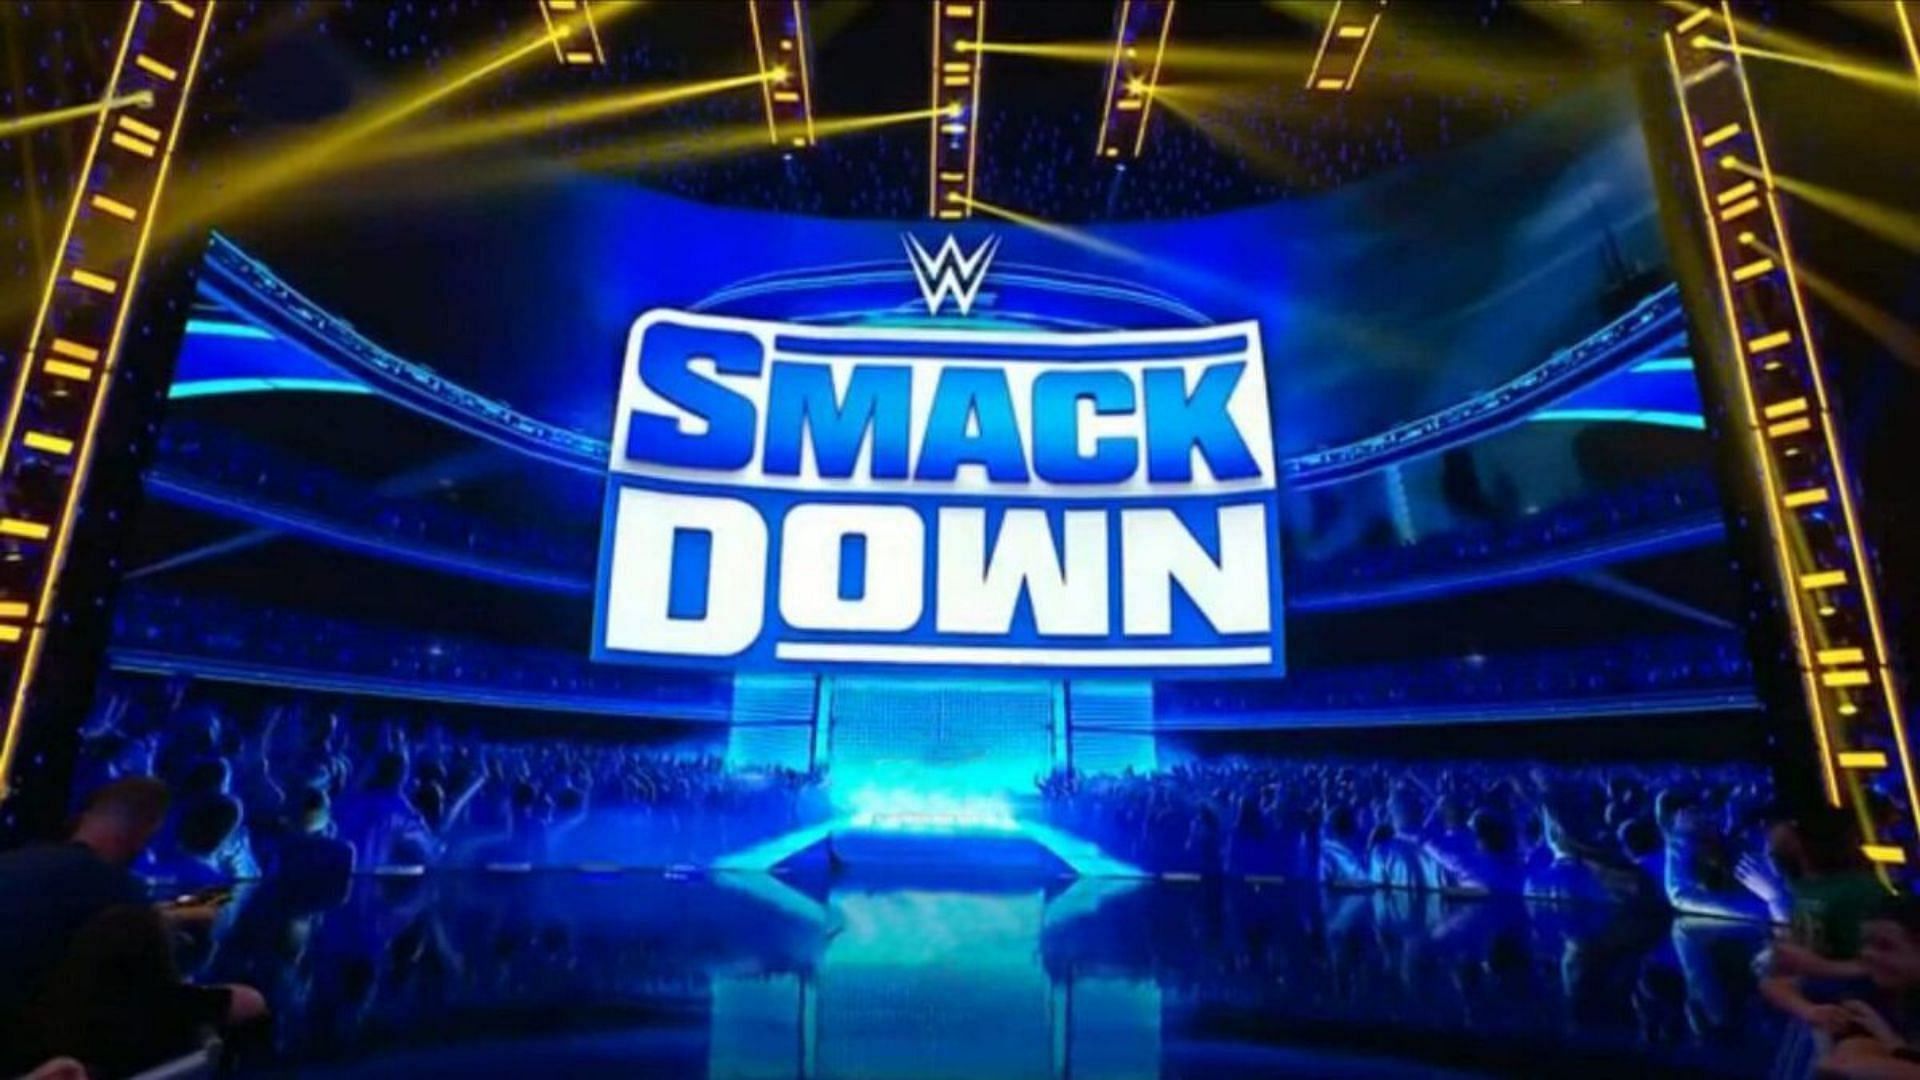 WWE SmackDown has been on the air since 1999. 